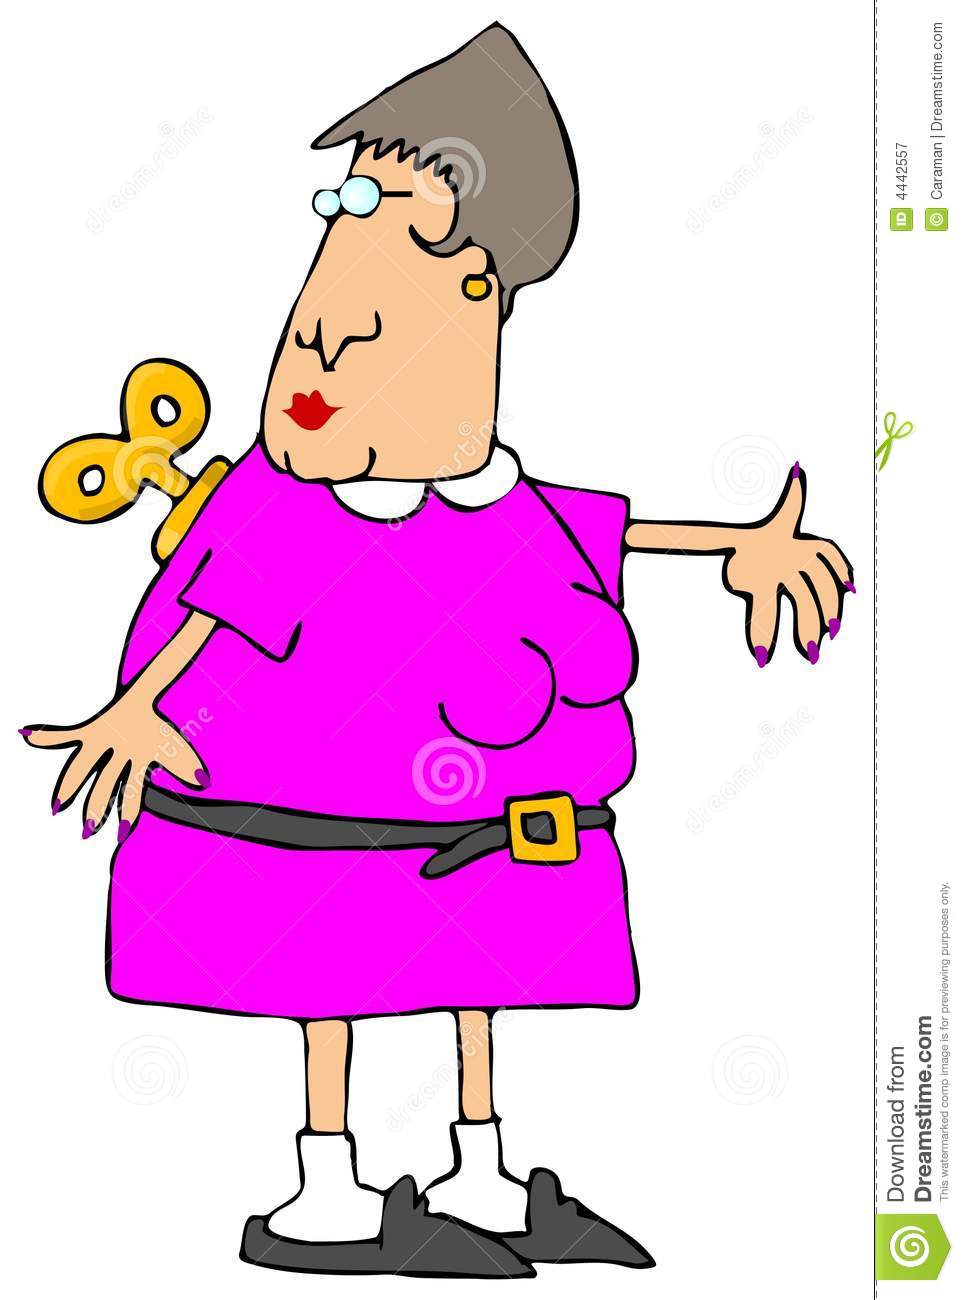 This Illustration Depicts A Woman With A Wind Up Key On Her Back